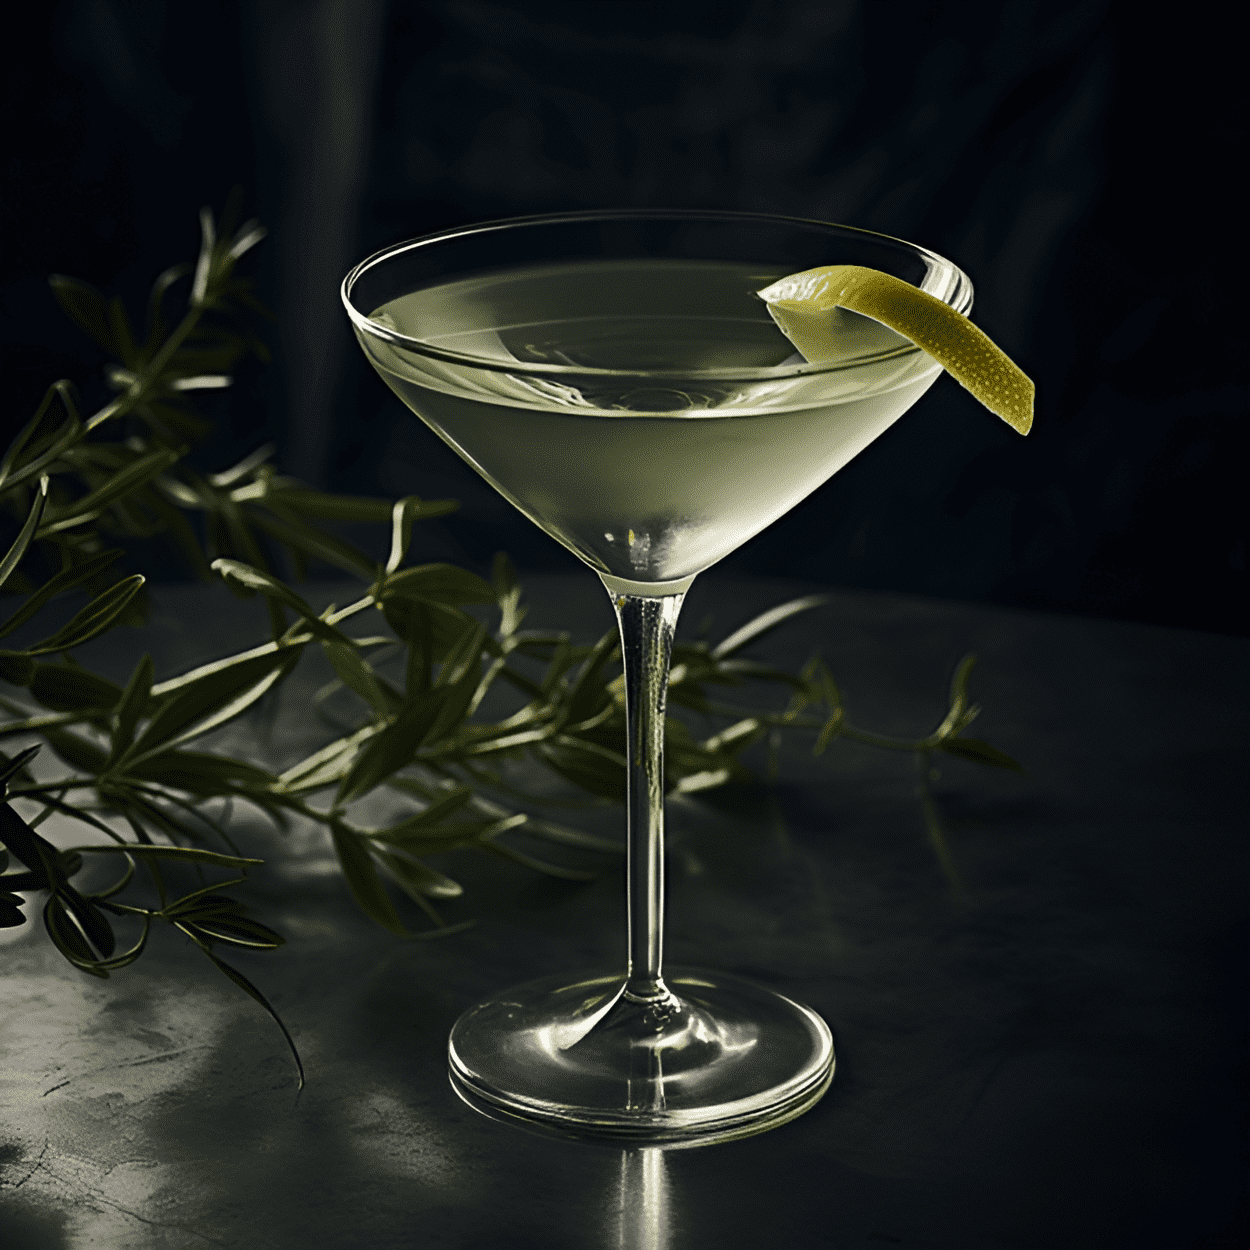 Vesper Martini Cocktail Recipe - The Vesper Martini has a strong, bold, and slightly bitter taste with a smooth, silky finish. The combination of gin, vodka, and Lillet Blanc creates a complex, well-balanced flavor profile that is both refreshing and invigorating.